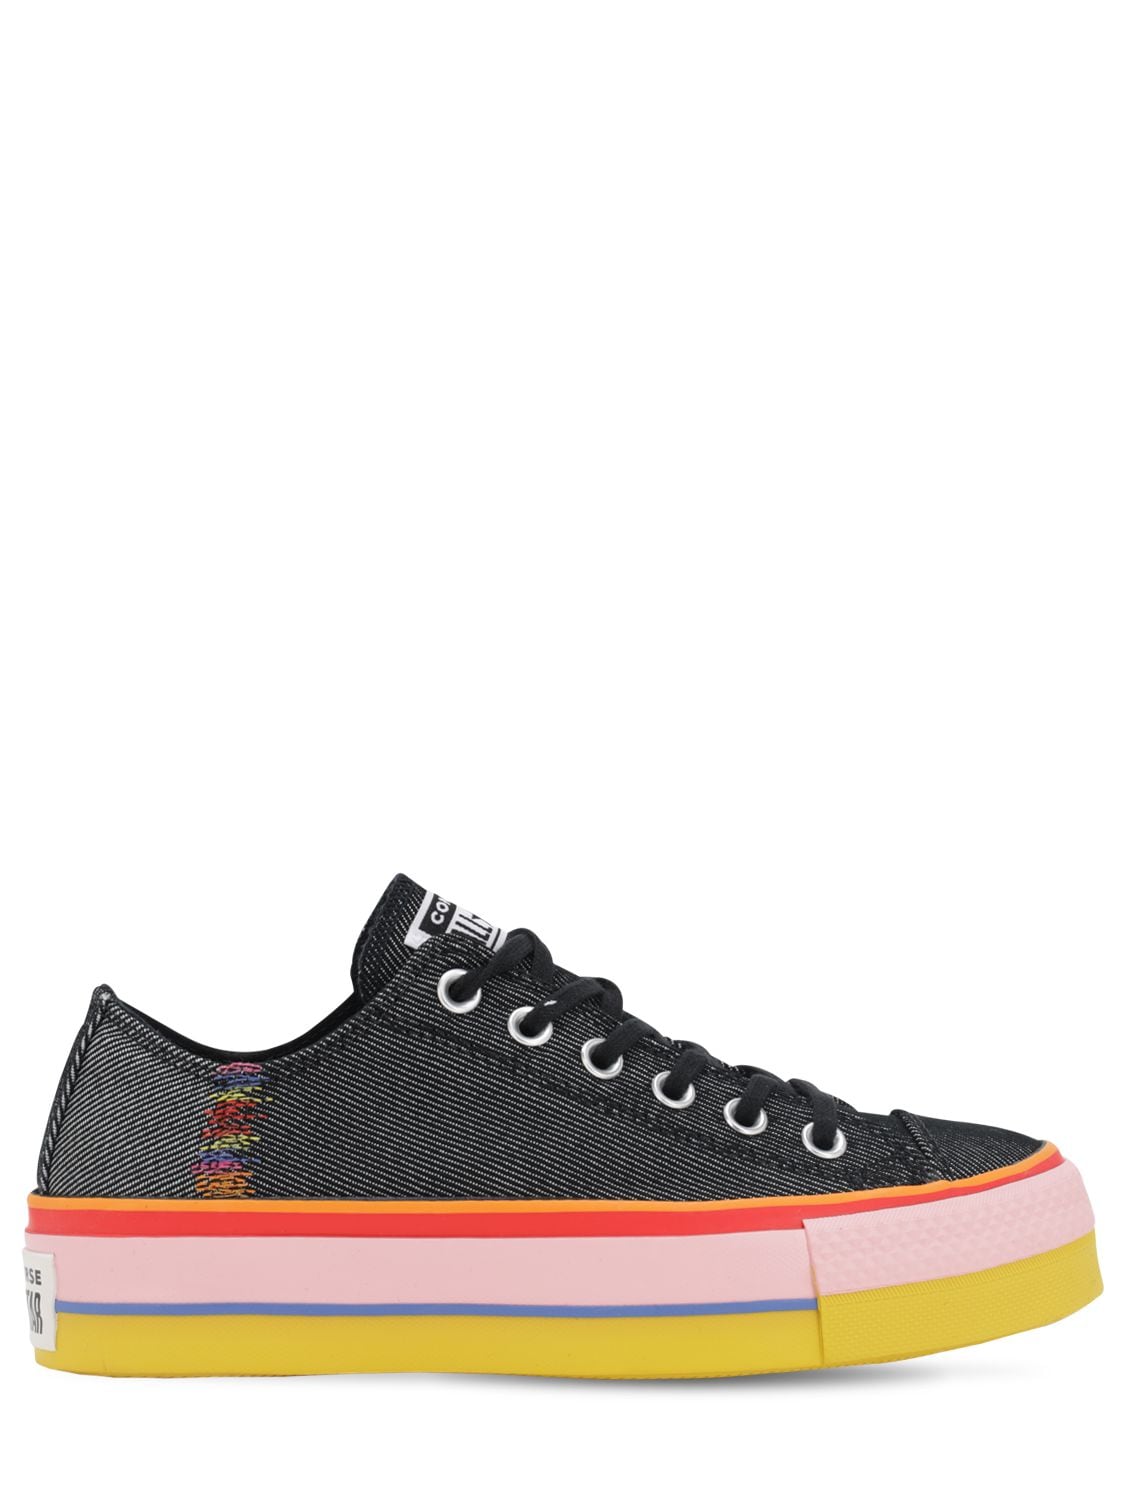 Converse Chuck Taylor All Star Lift Ox Sneakers In Black,pink